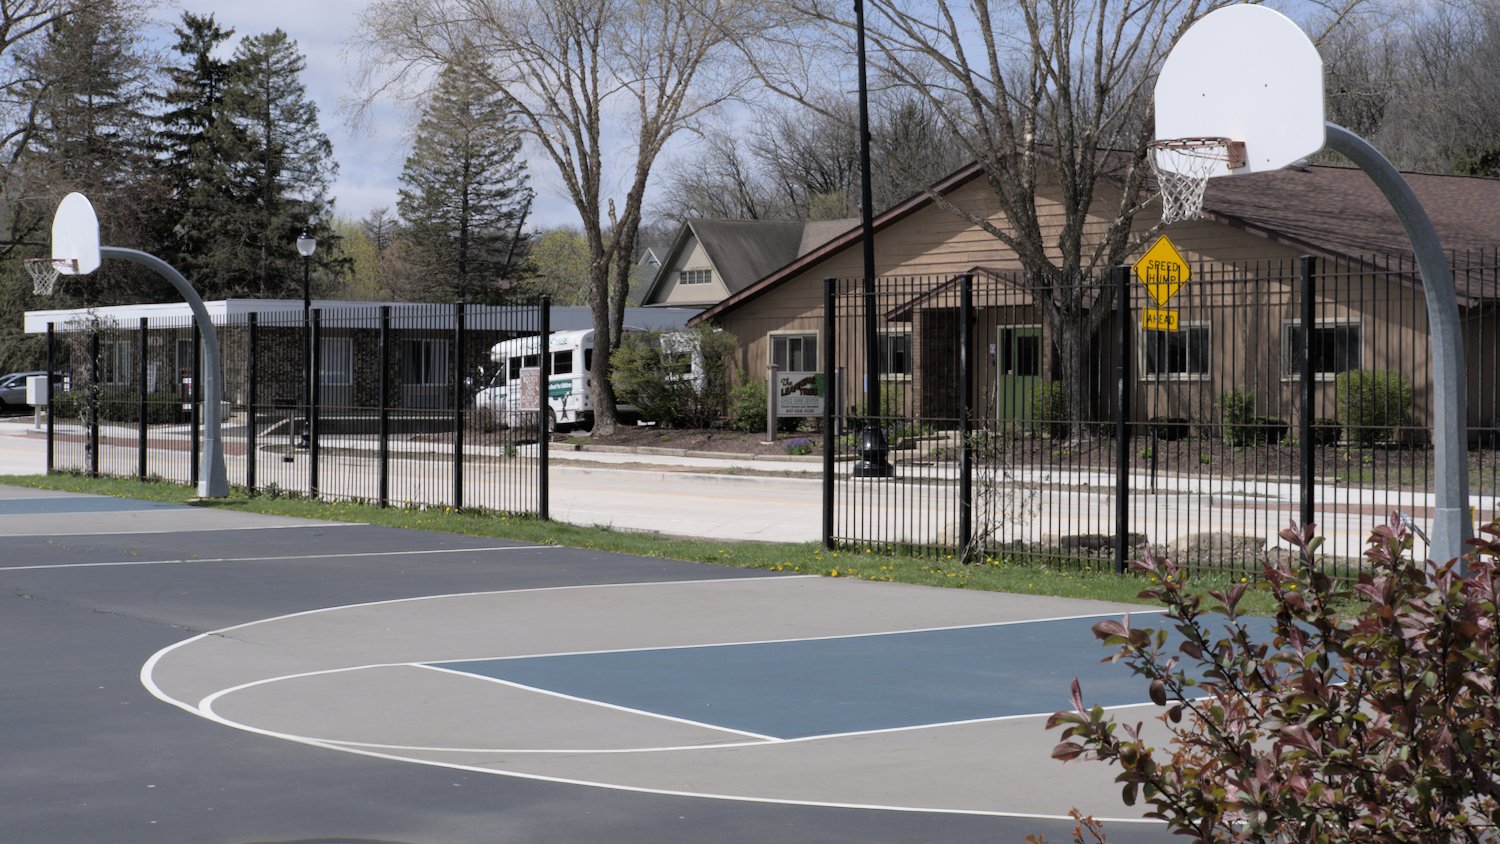 Two basketball courts in the park.